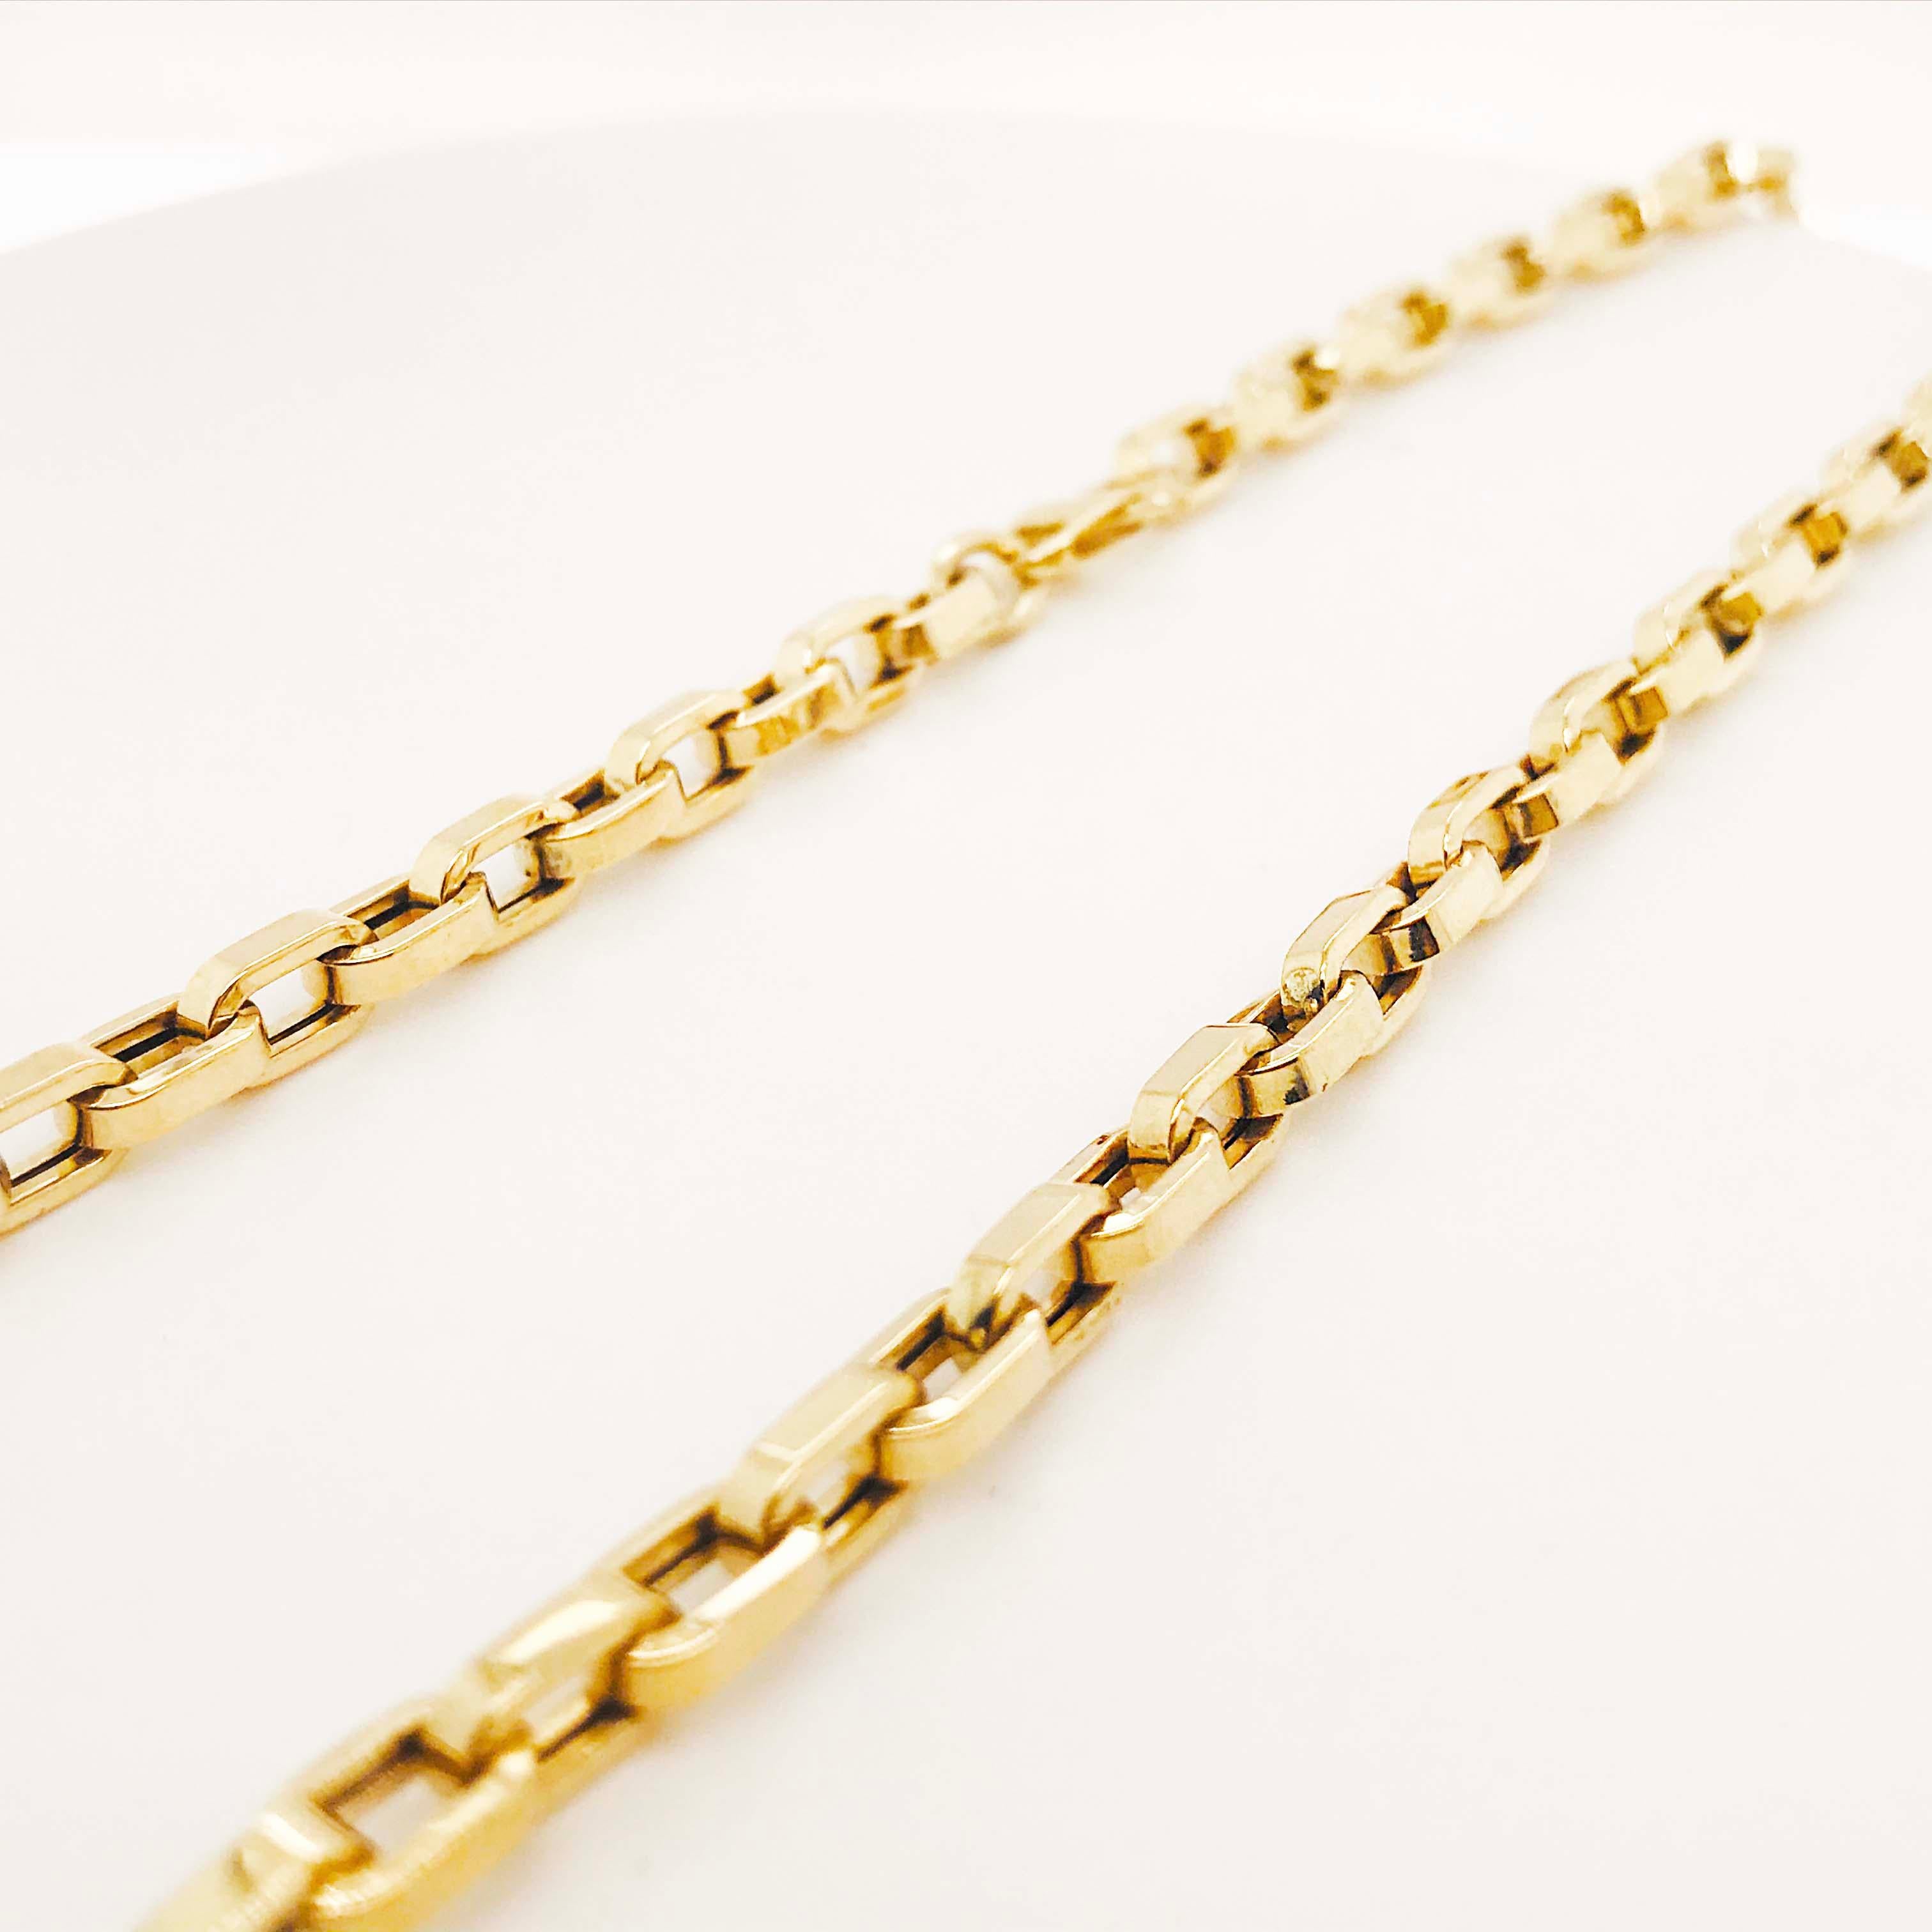 Large 14k Link Chain Necklace, PaperClip Chain Cable w Large Clasp in 14kt Gold 1